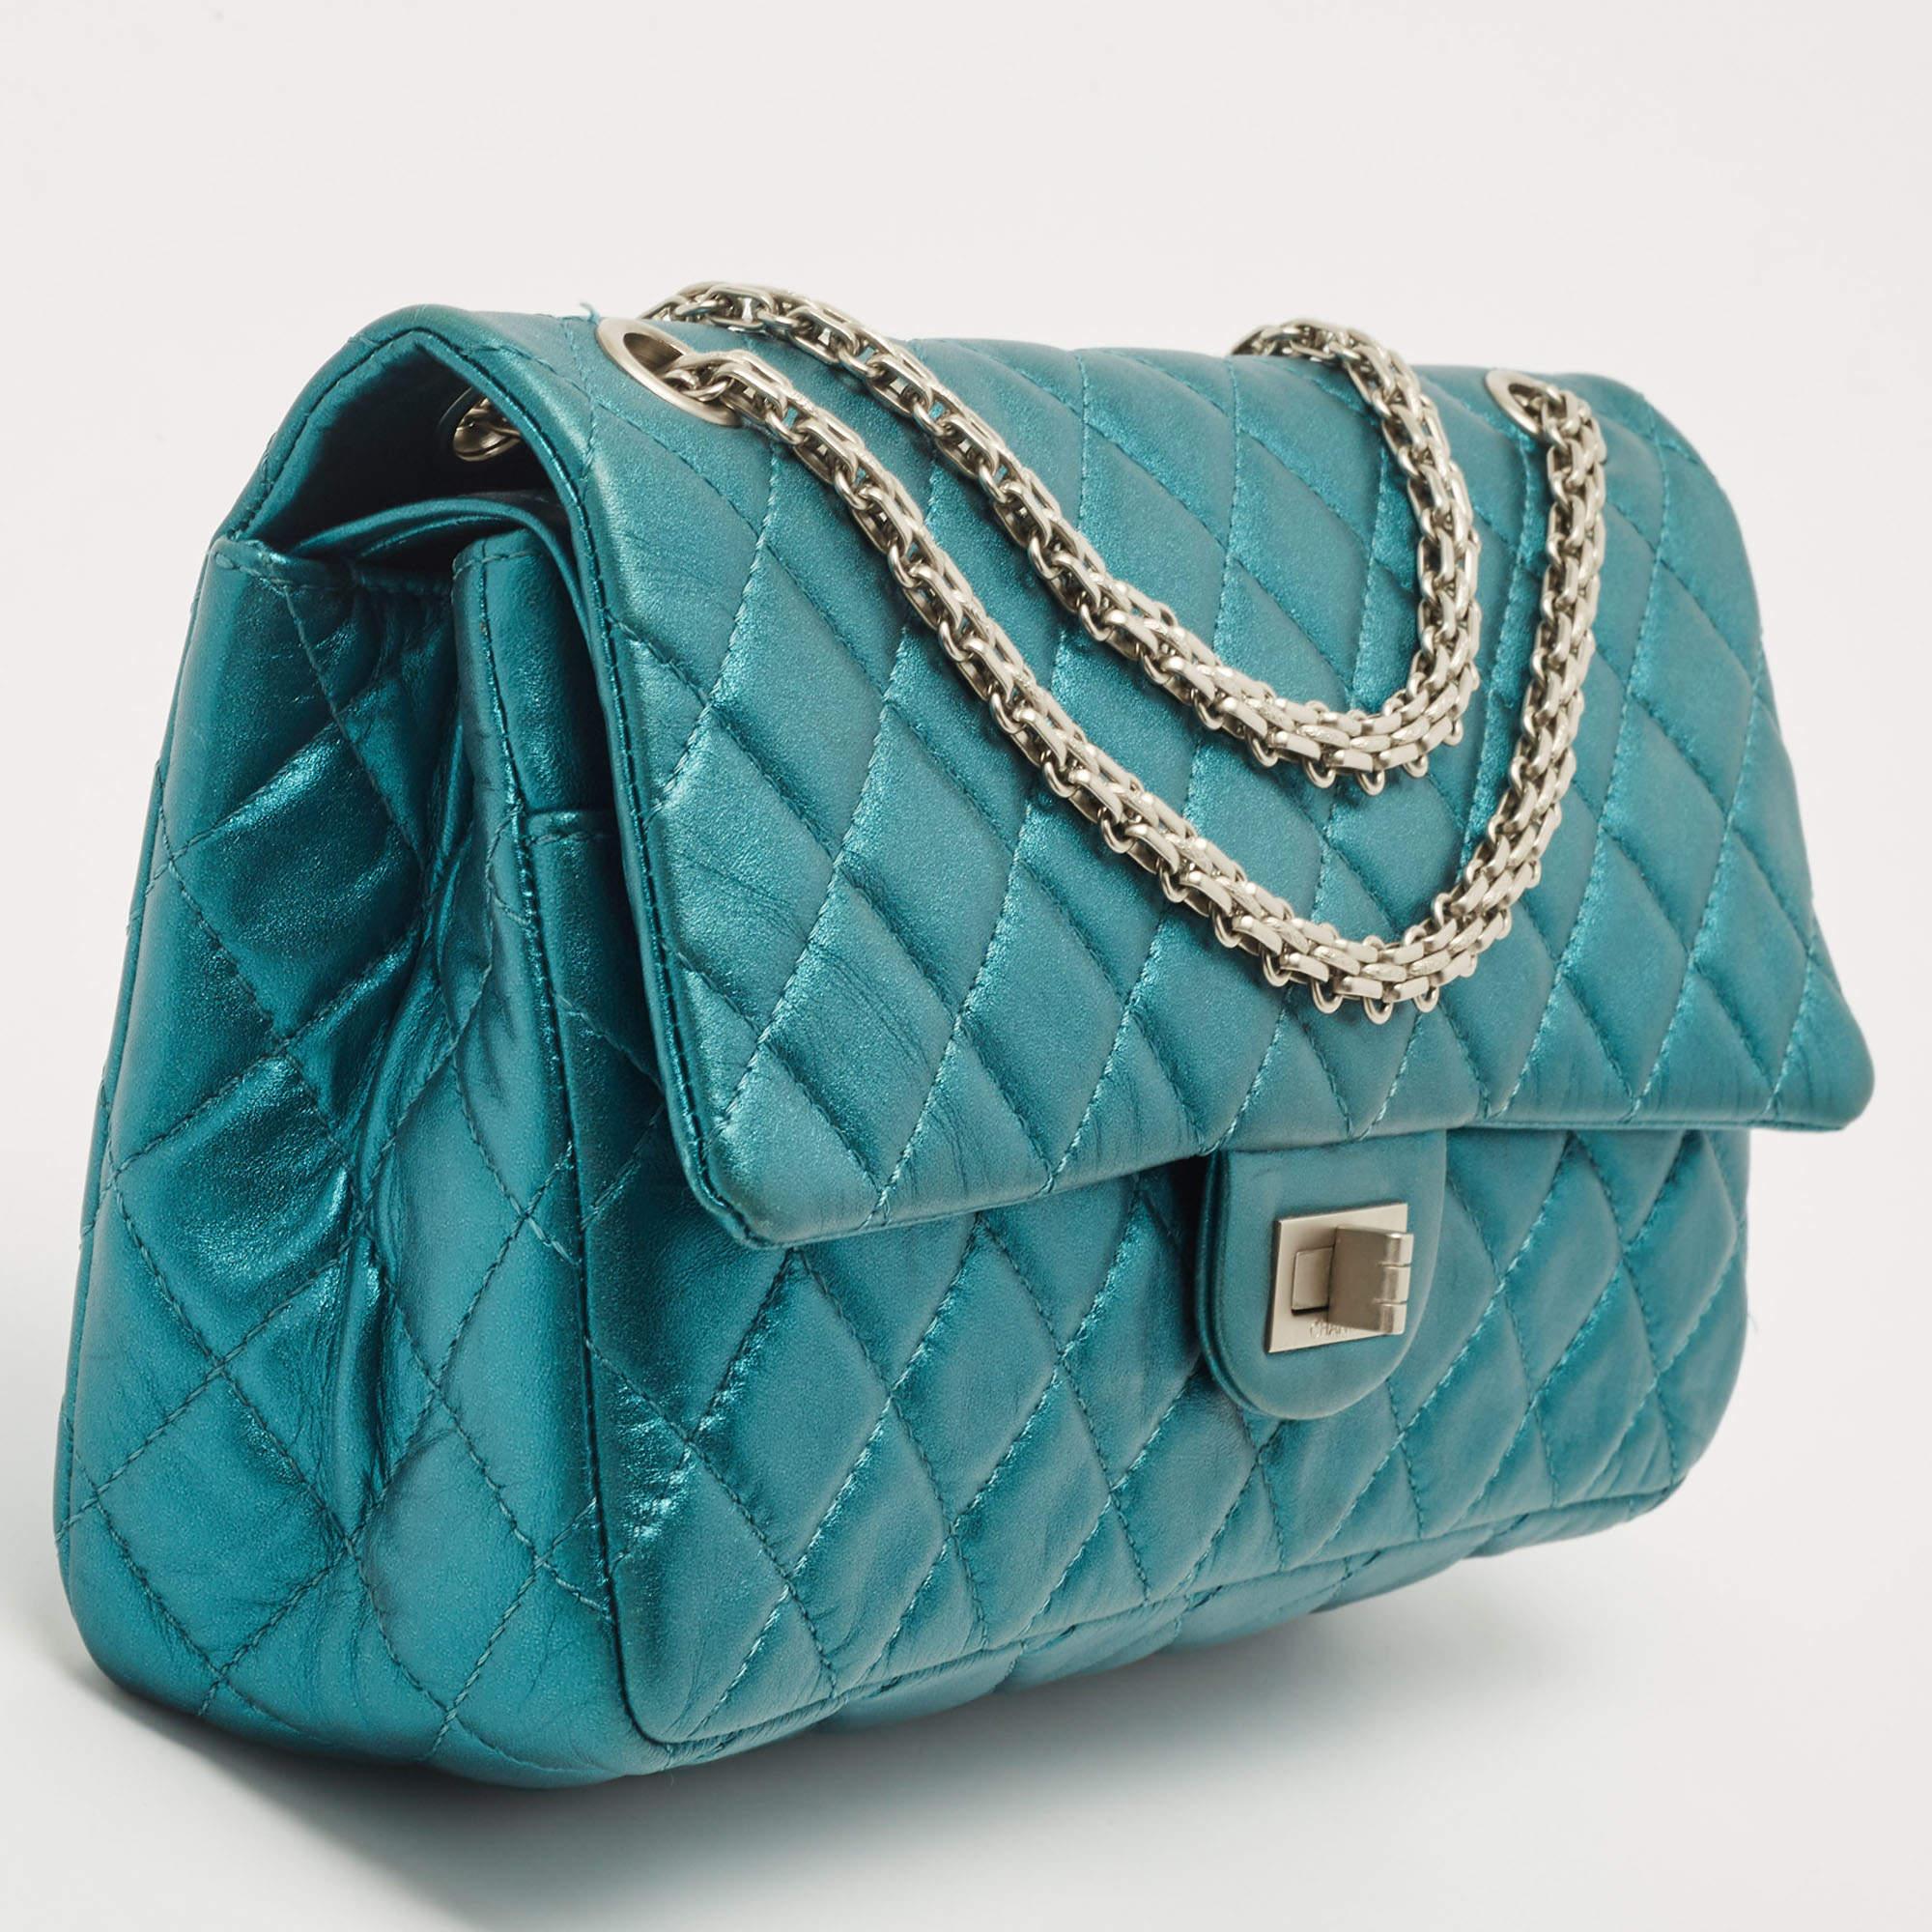 Chanel Metallic Teal Green Quilted Leather Reissue 2.55 Classic 226 Flap Bag In Good Condition For Sale In Dubai, Al Qouz 2